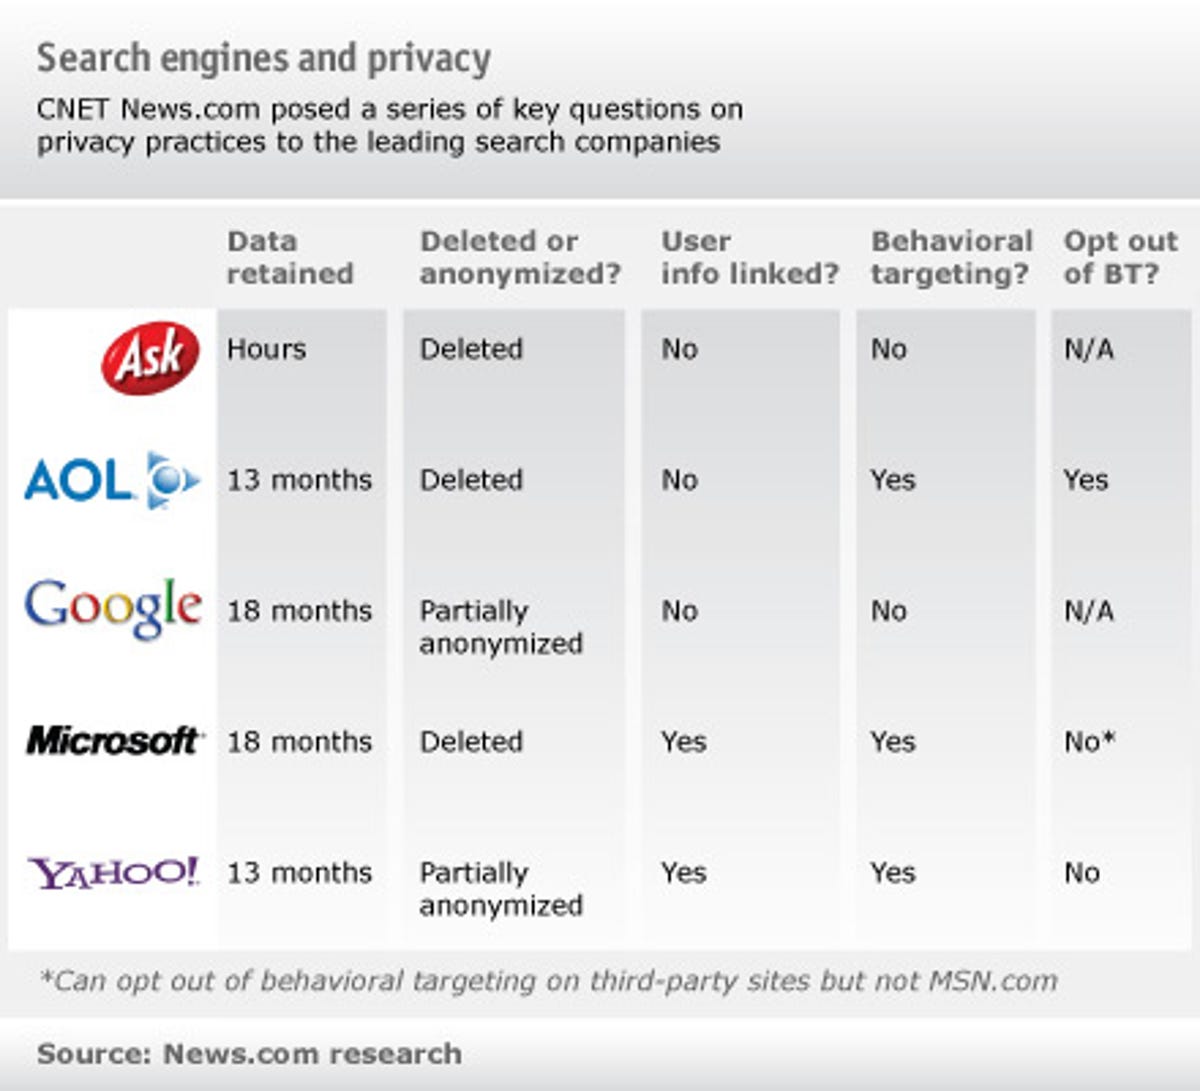 Search engine data practices